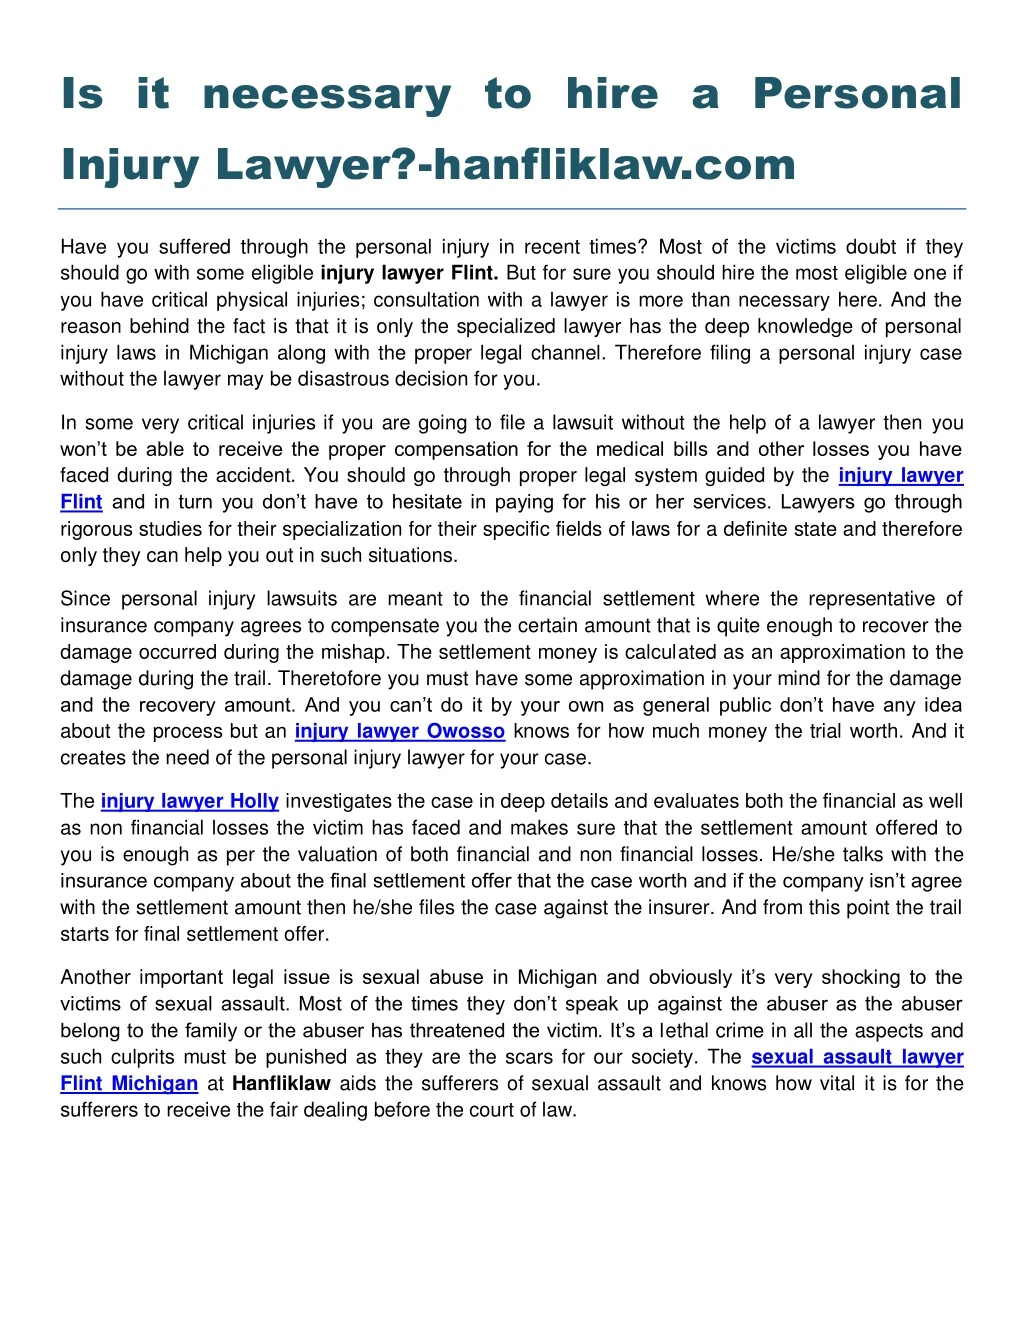 is it necessary to hire a personal injury lawyer